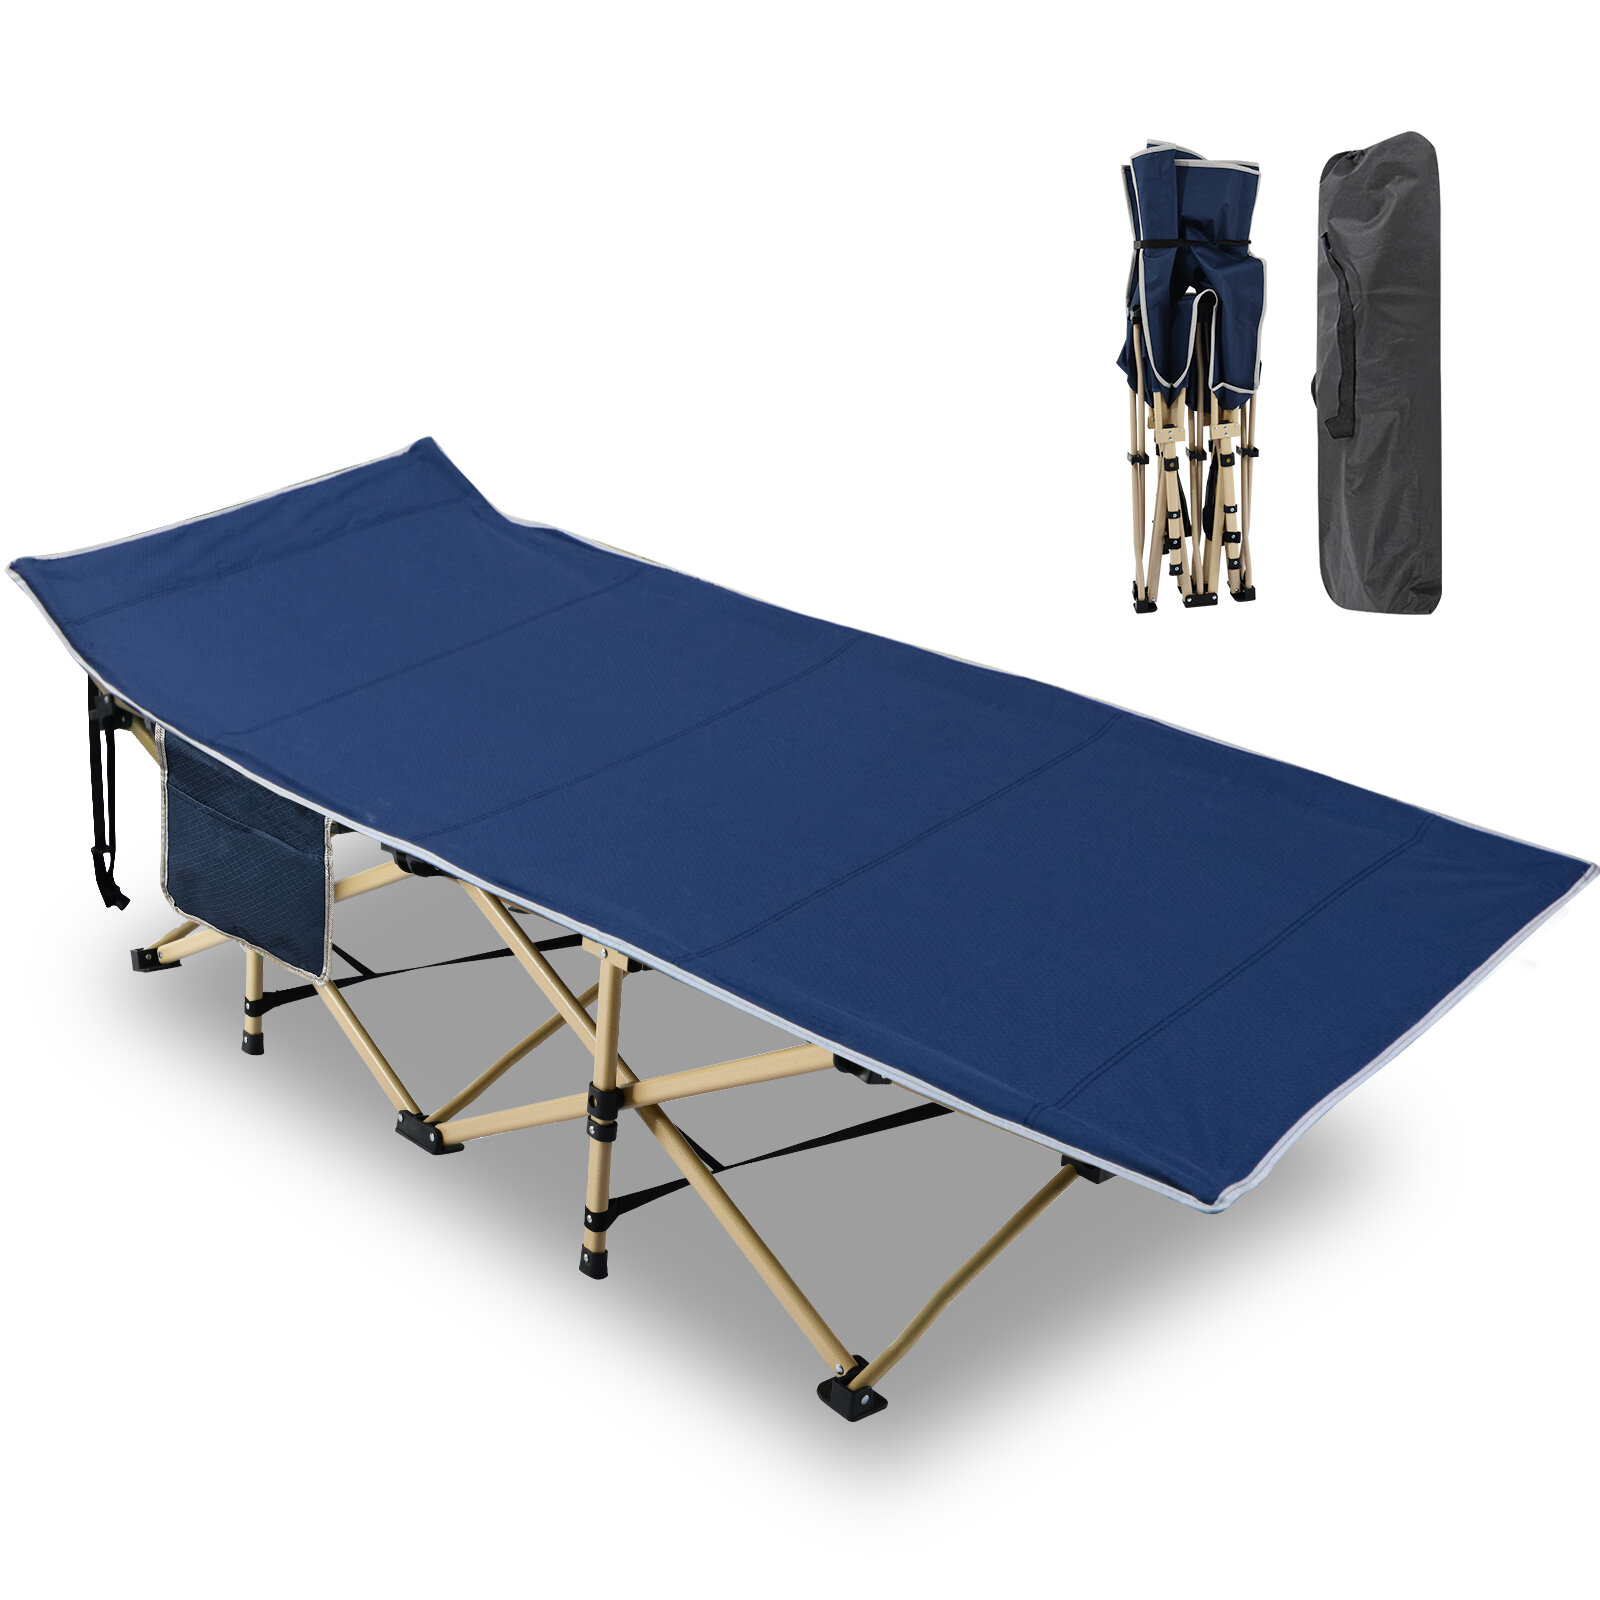 Military cots Great for Hunting Travel cots and Folding Cots Keeps Your Sleeping Pad Secure! Camping Bedding That fits Most Army cots Fitted Camping Cot Sheet for Adult Sleeping Cots 